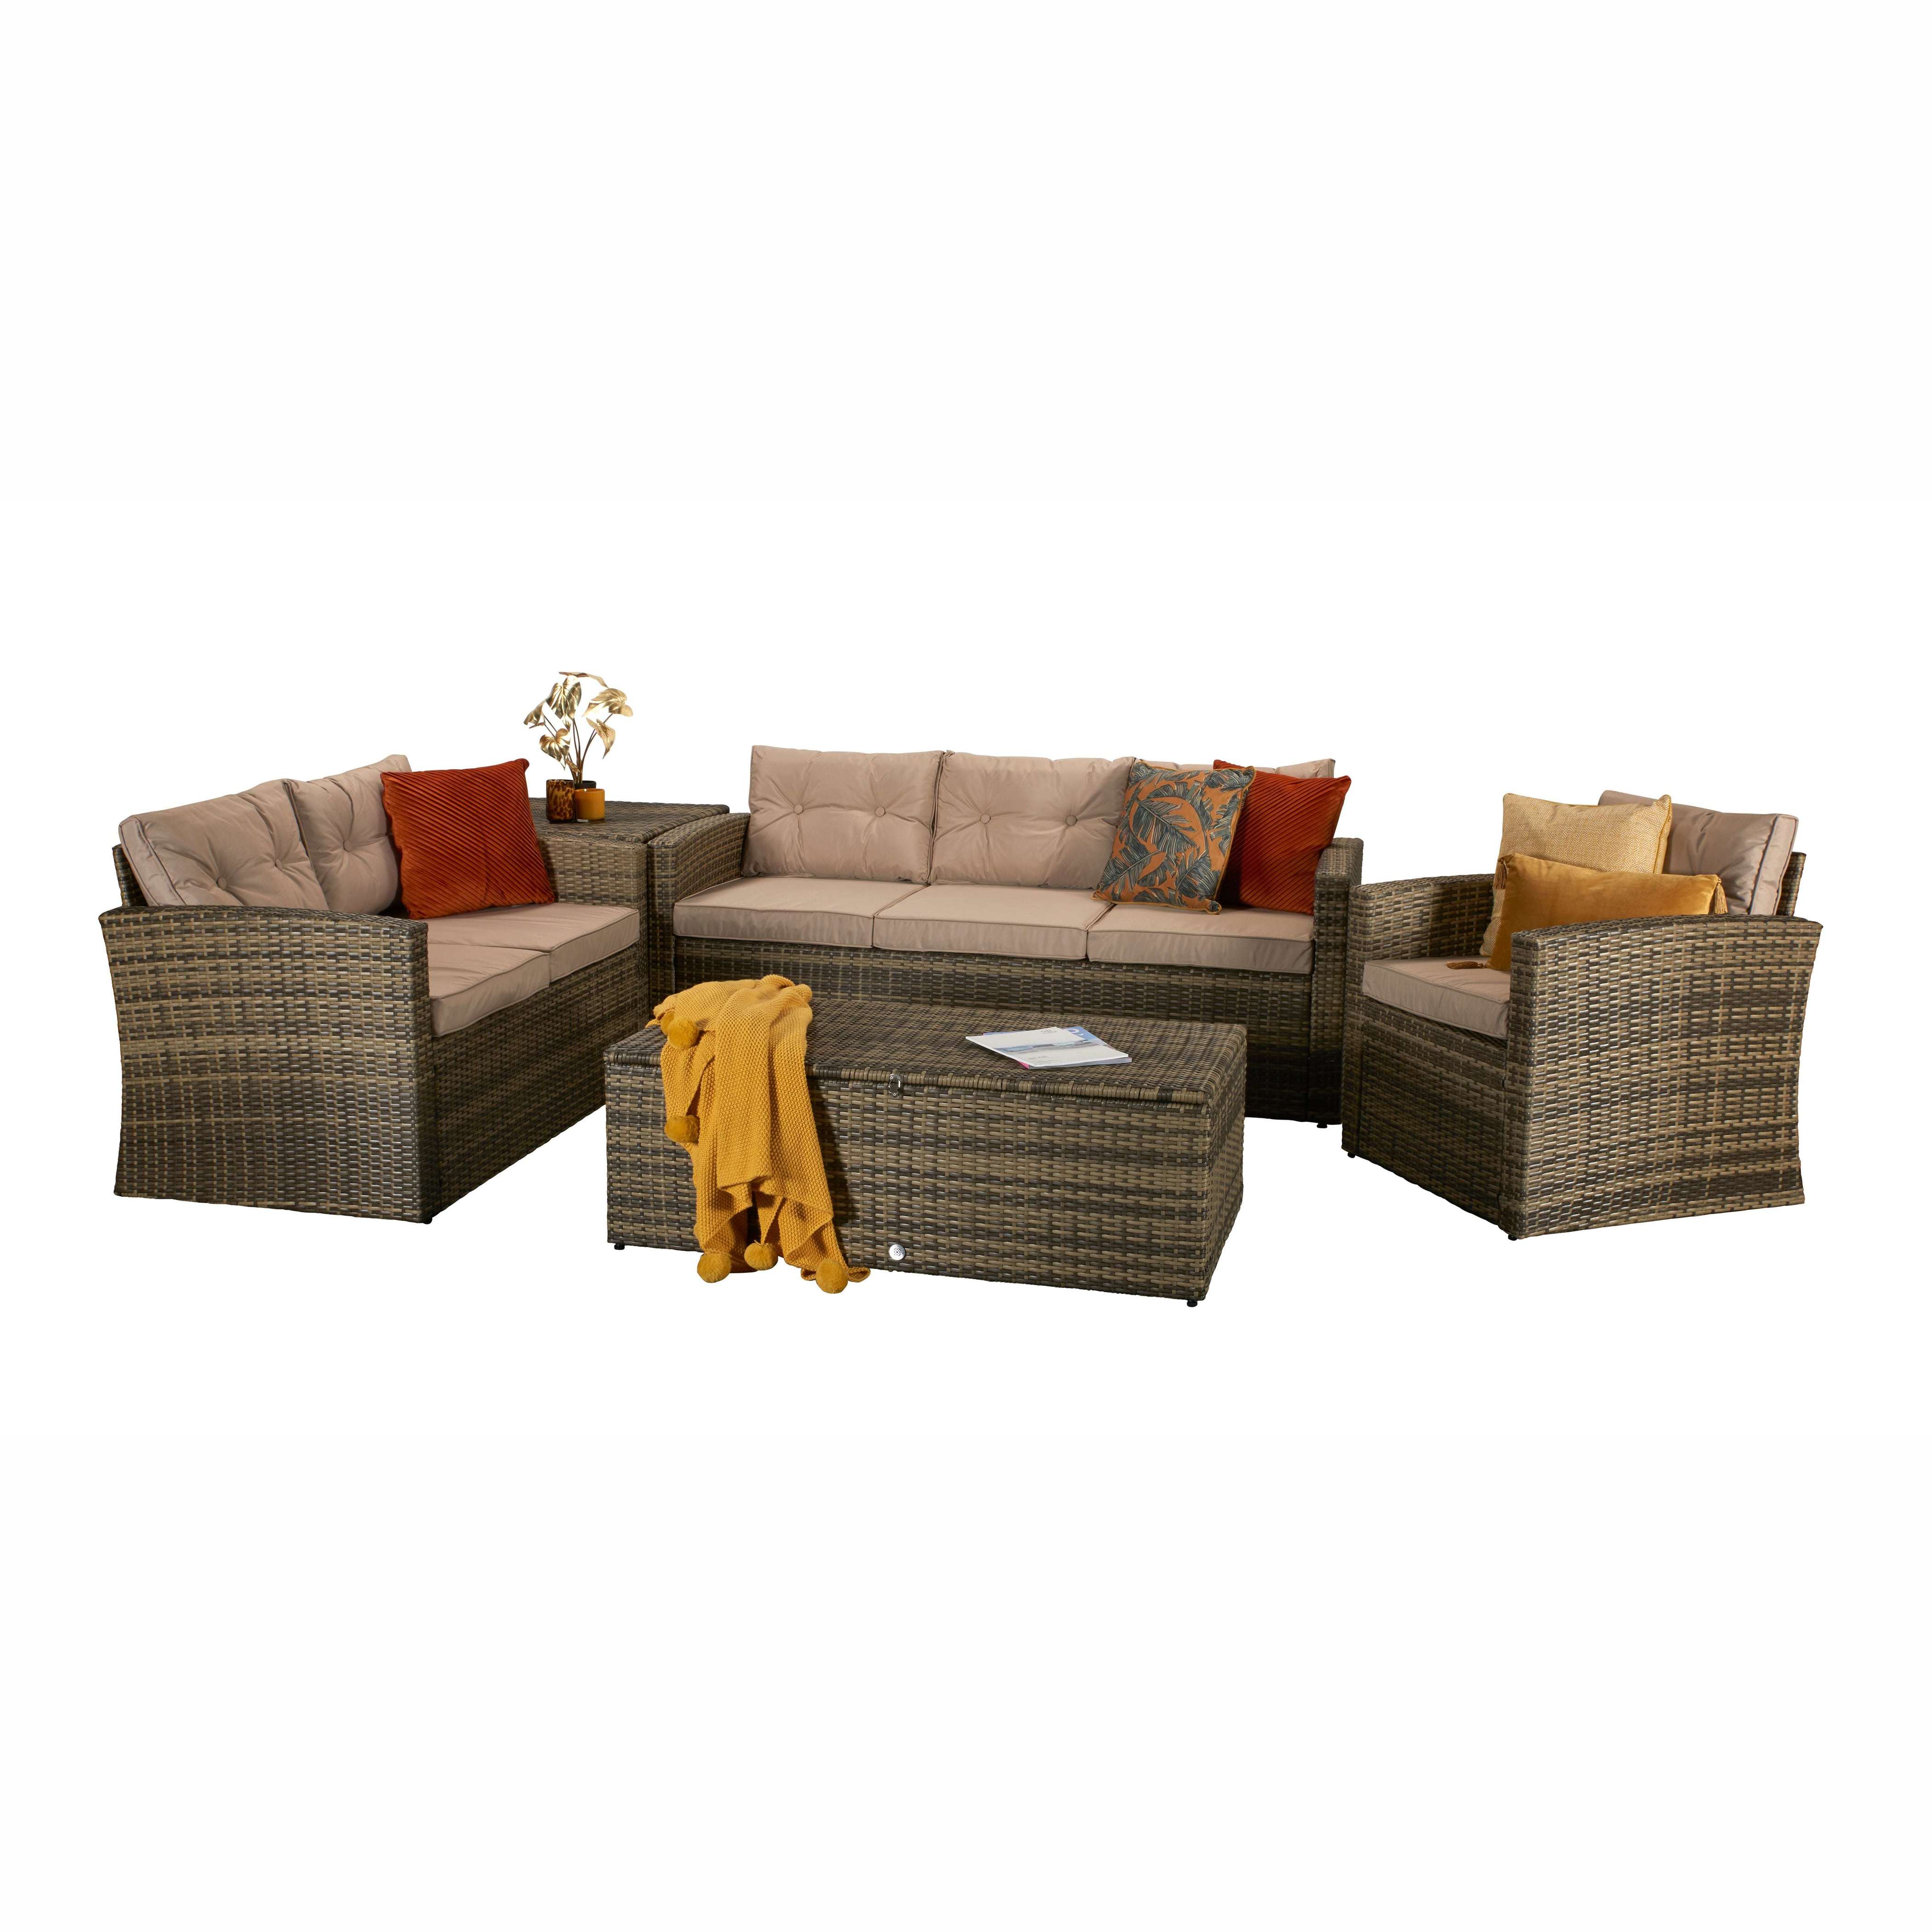 Exceptional Garden:Signature Weave Holly Sofa Set - Mixed Brown